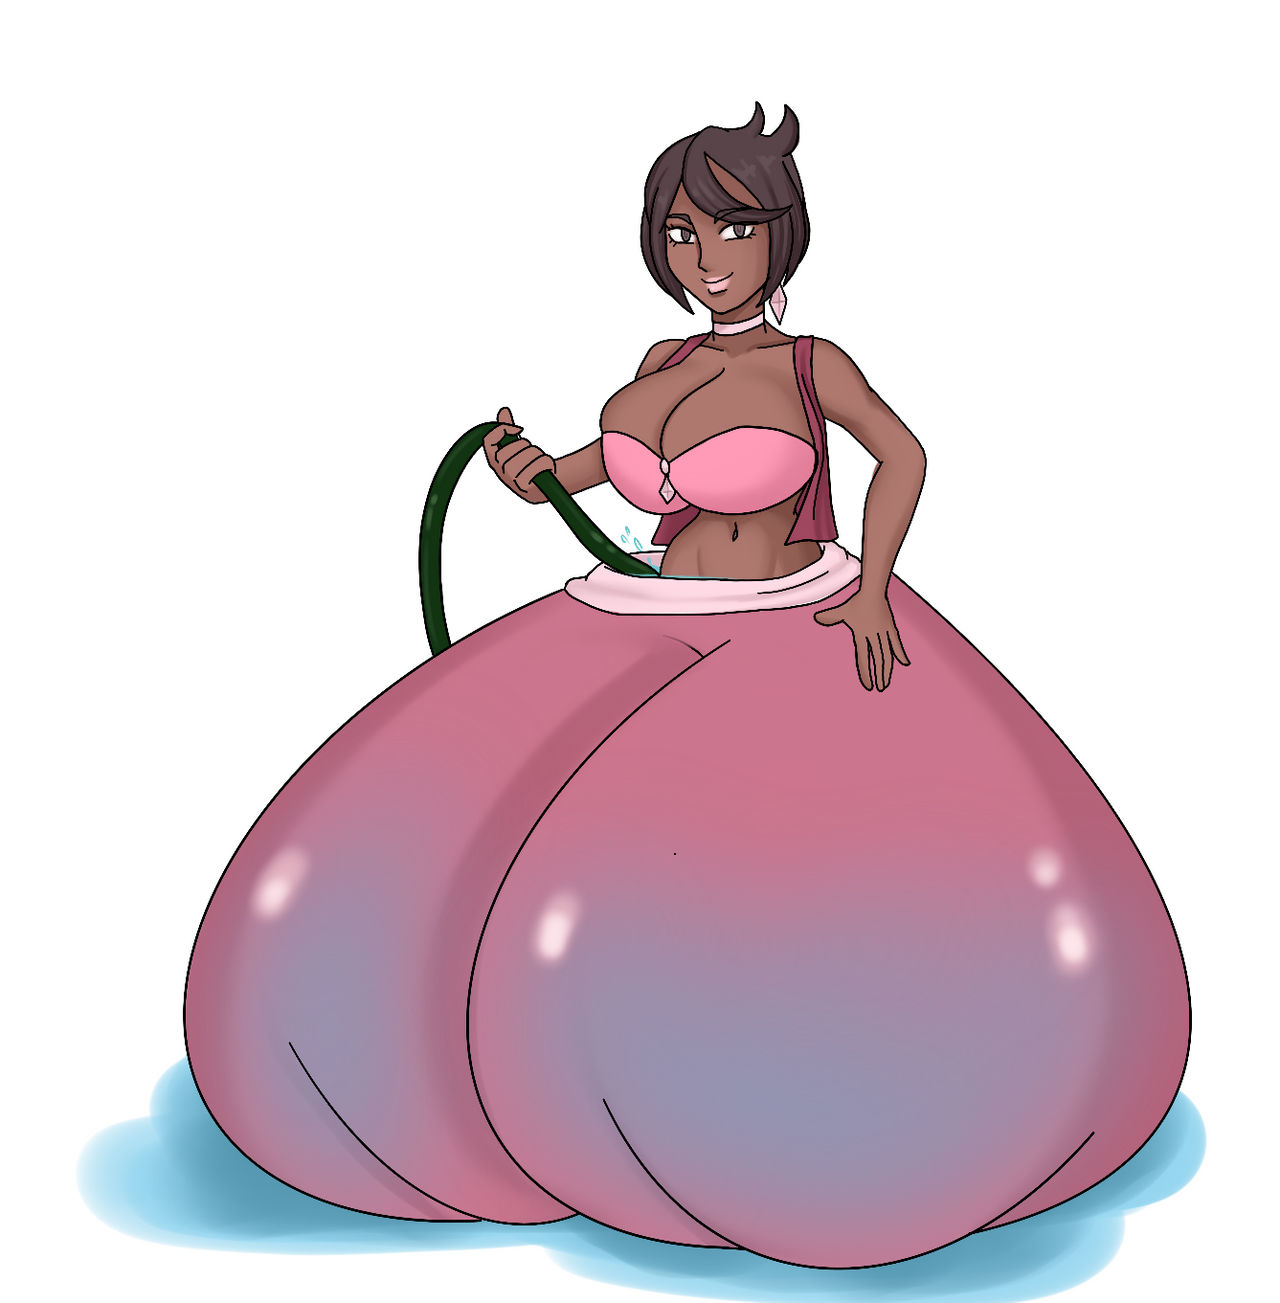 Olivia Water Pants inflation by Hoshii-po on DeviantArt